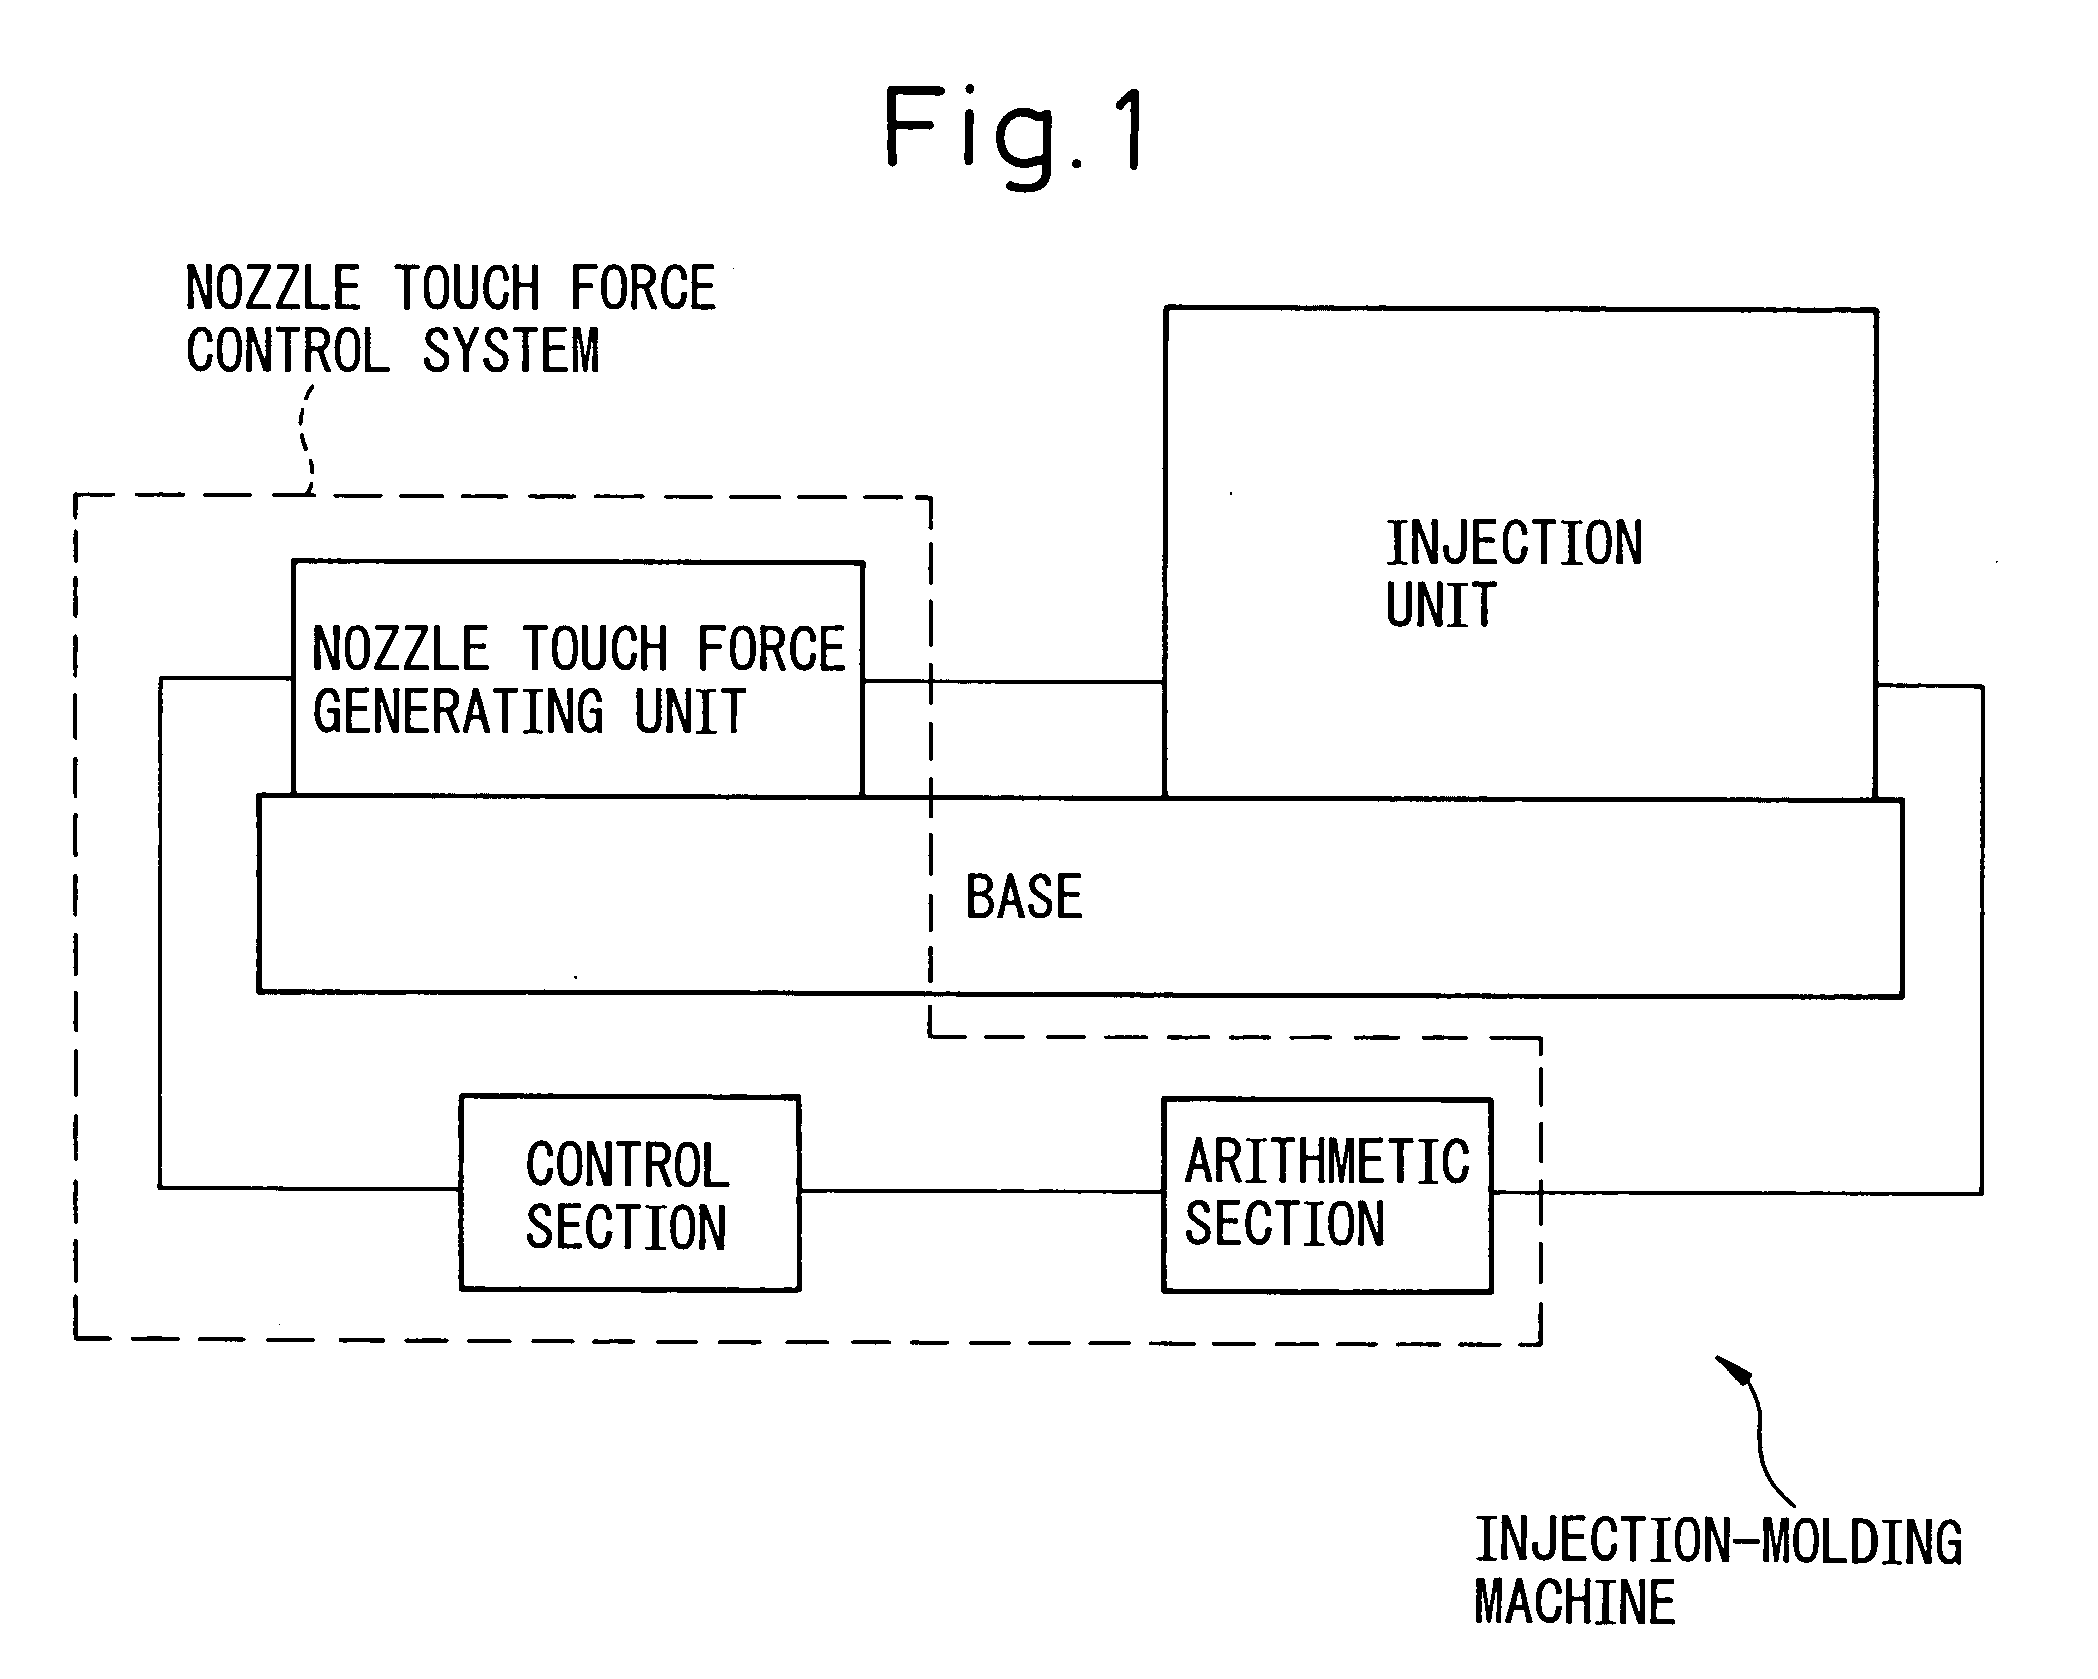 System for controlling nozzle touch force